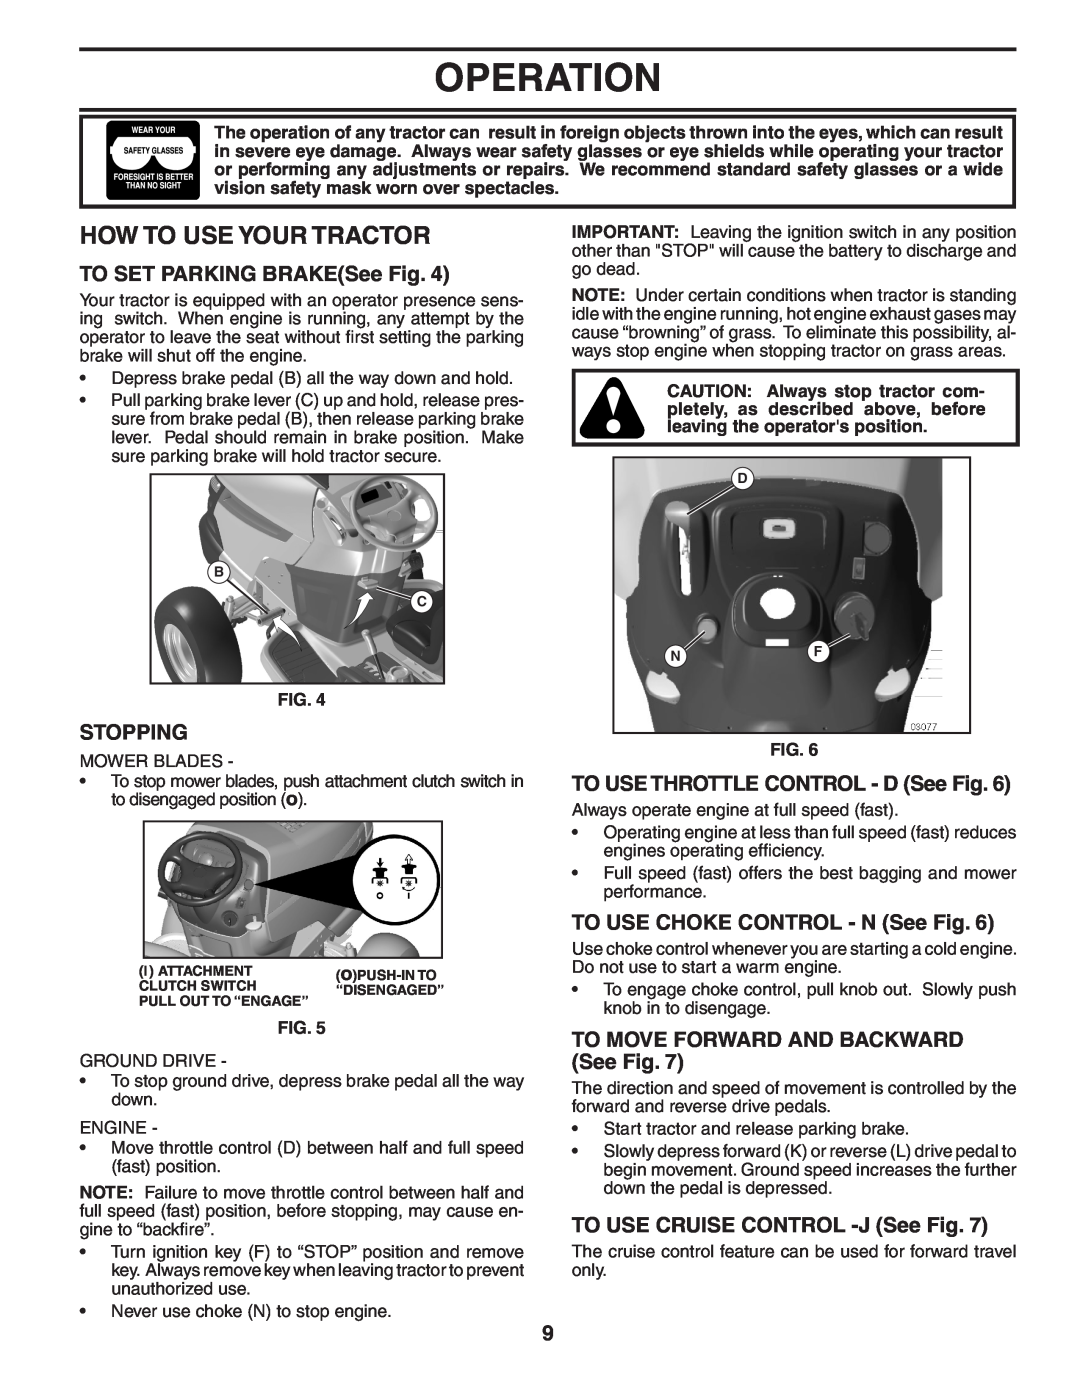 Poulan 402557 manual How To Use Your Tractor, TO SET PARKING BRAKESee Fig, Stopping, TO USE THROTTLE CONTROL - D See Fig 